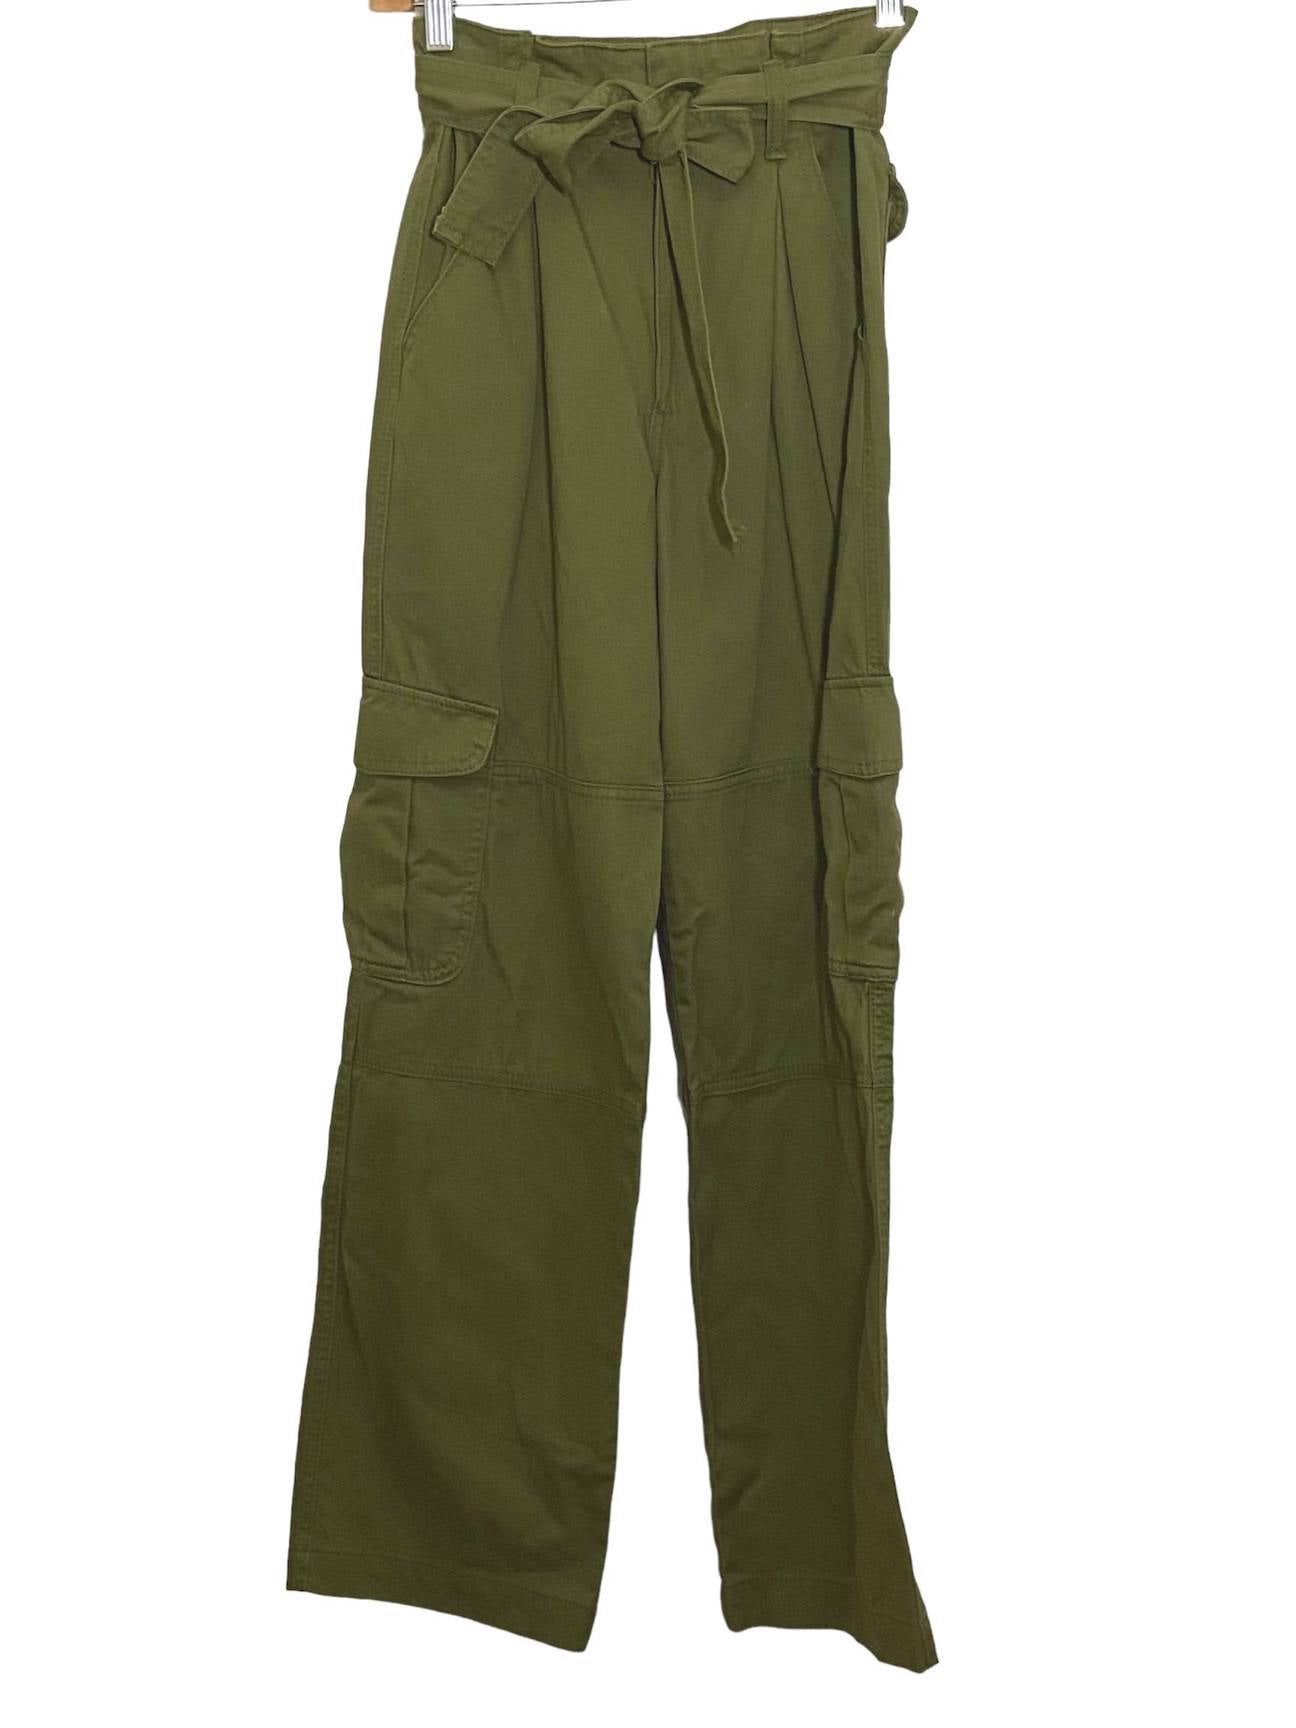 Warm Autumn FOREVER 21 olive green tie belt cargo pant